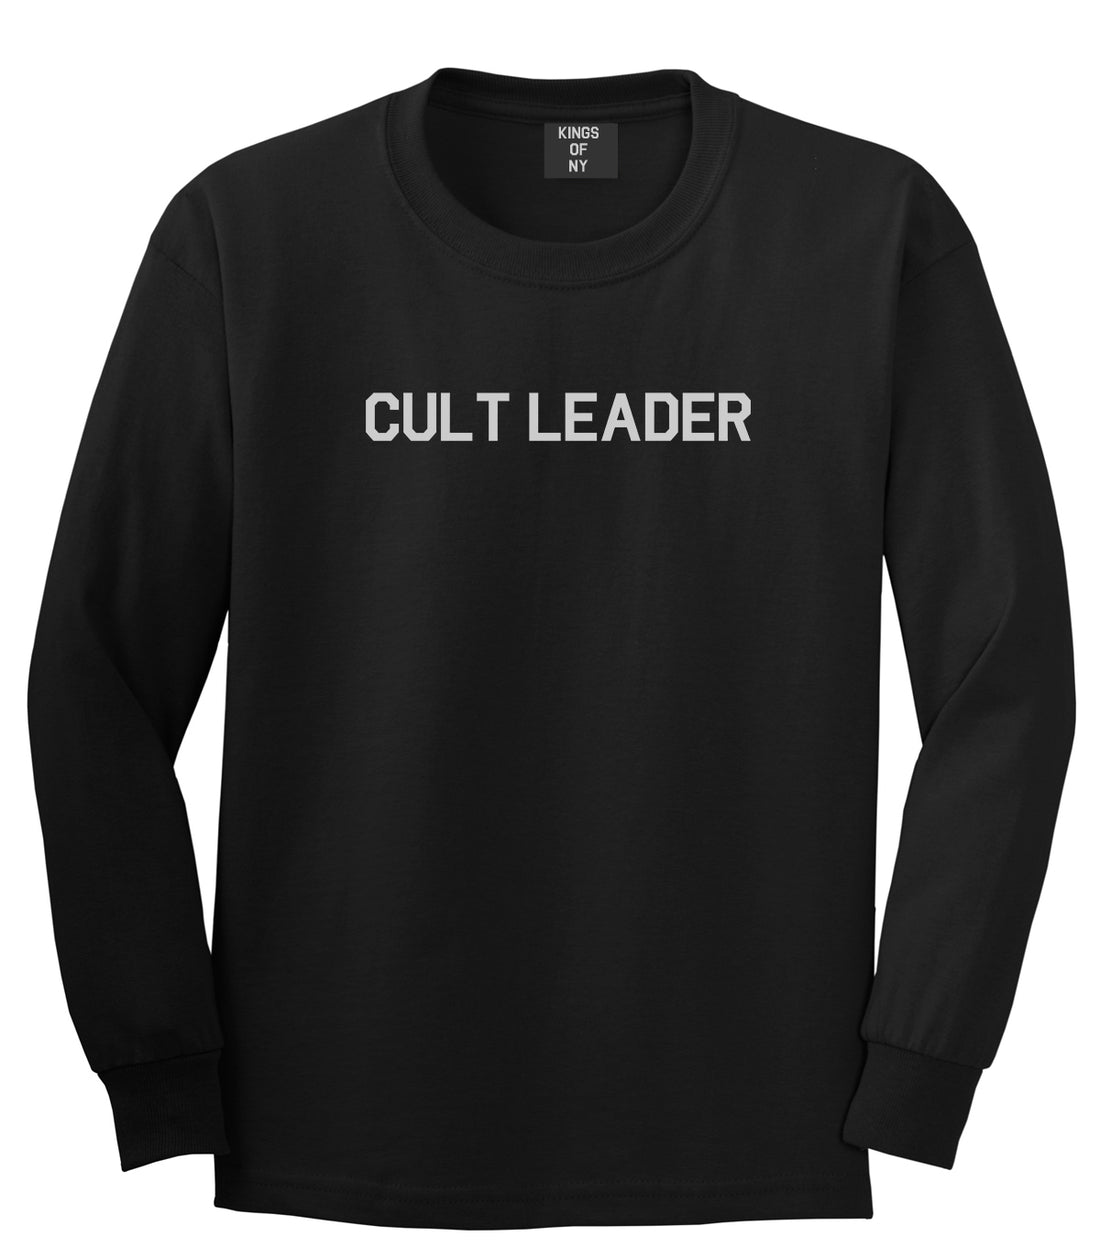 Cult Leader Costume Mens Long Sleeve T-Shirt Black by Kings Of NY